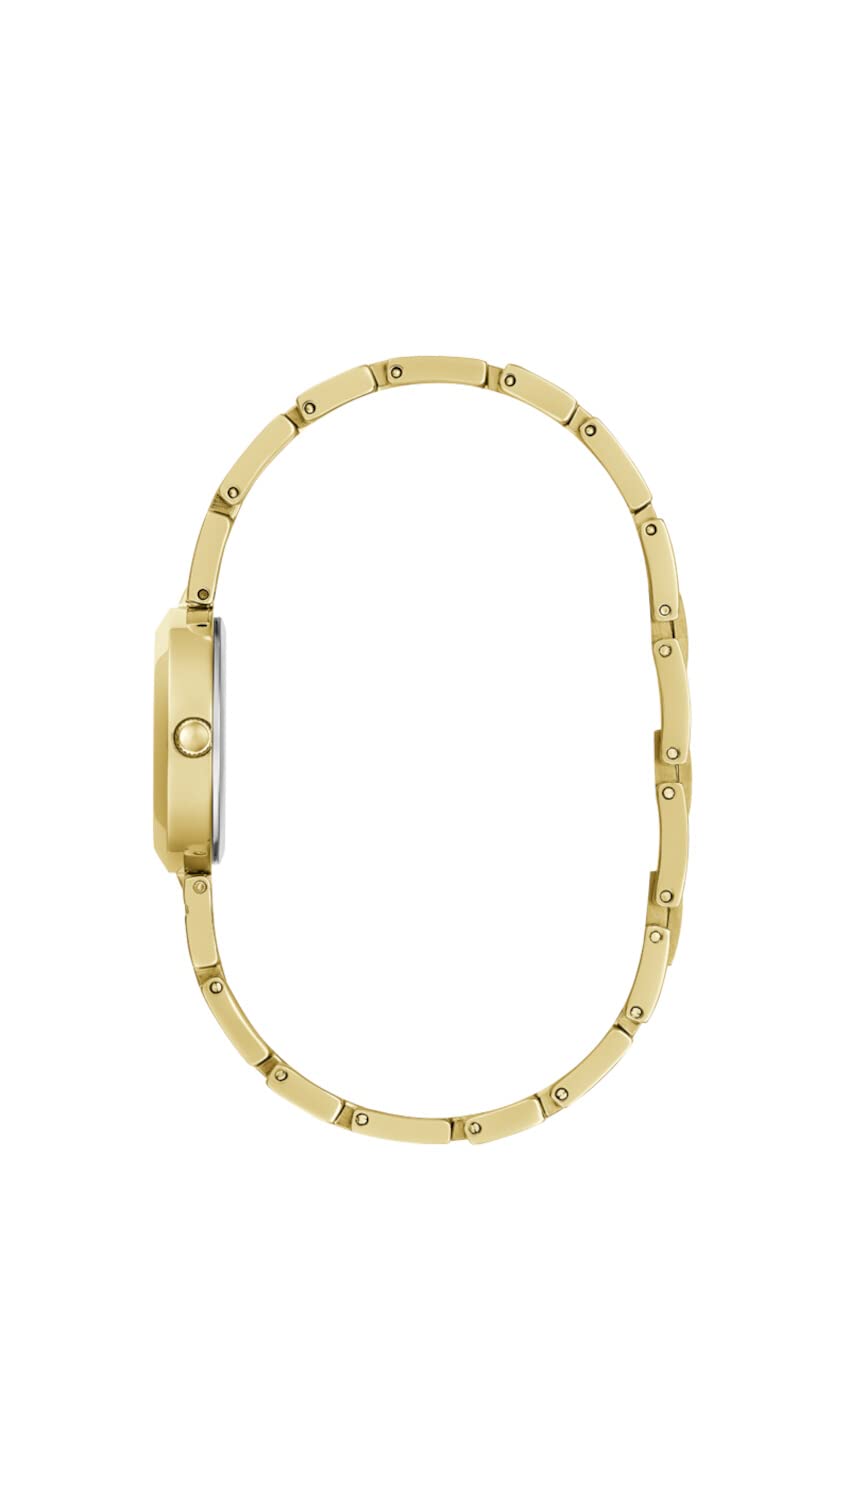 GUESS Ladies 26mm Watch - Gold Tone Strap Champagne Dial Gold Tone Case